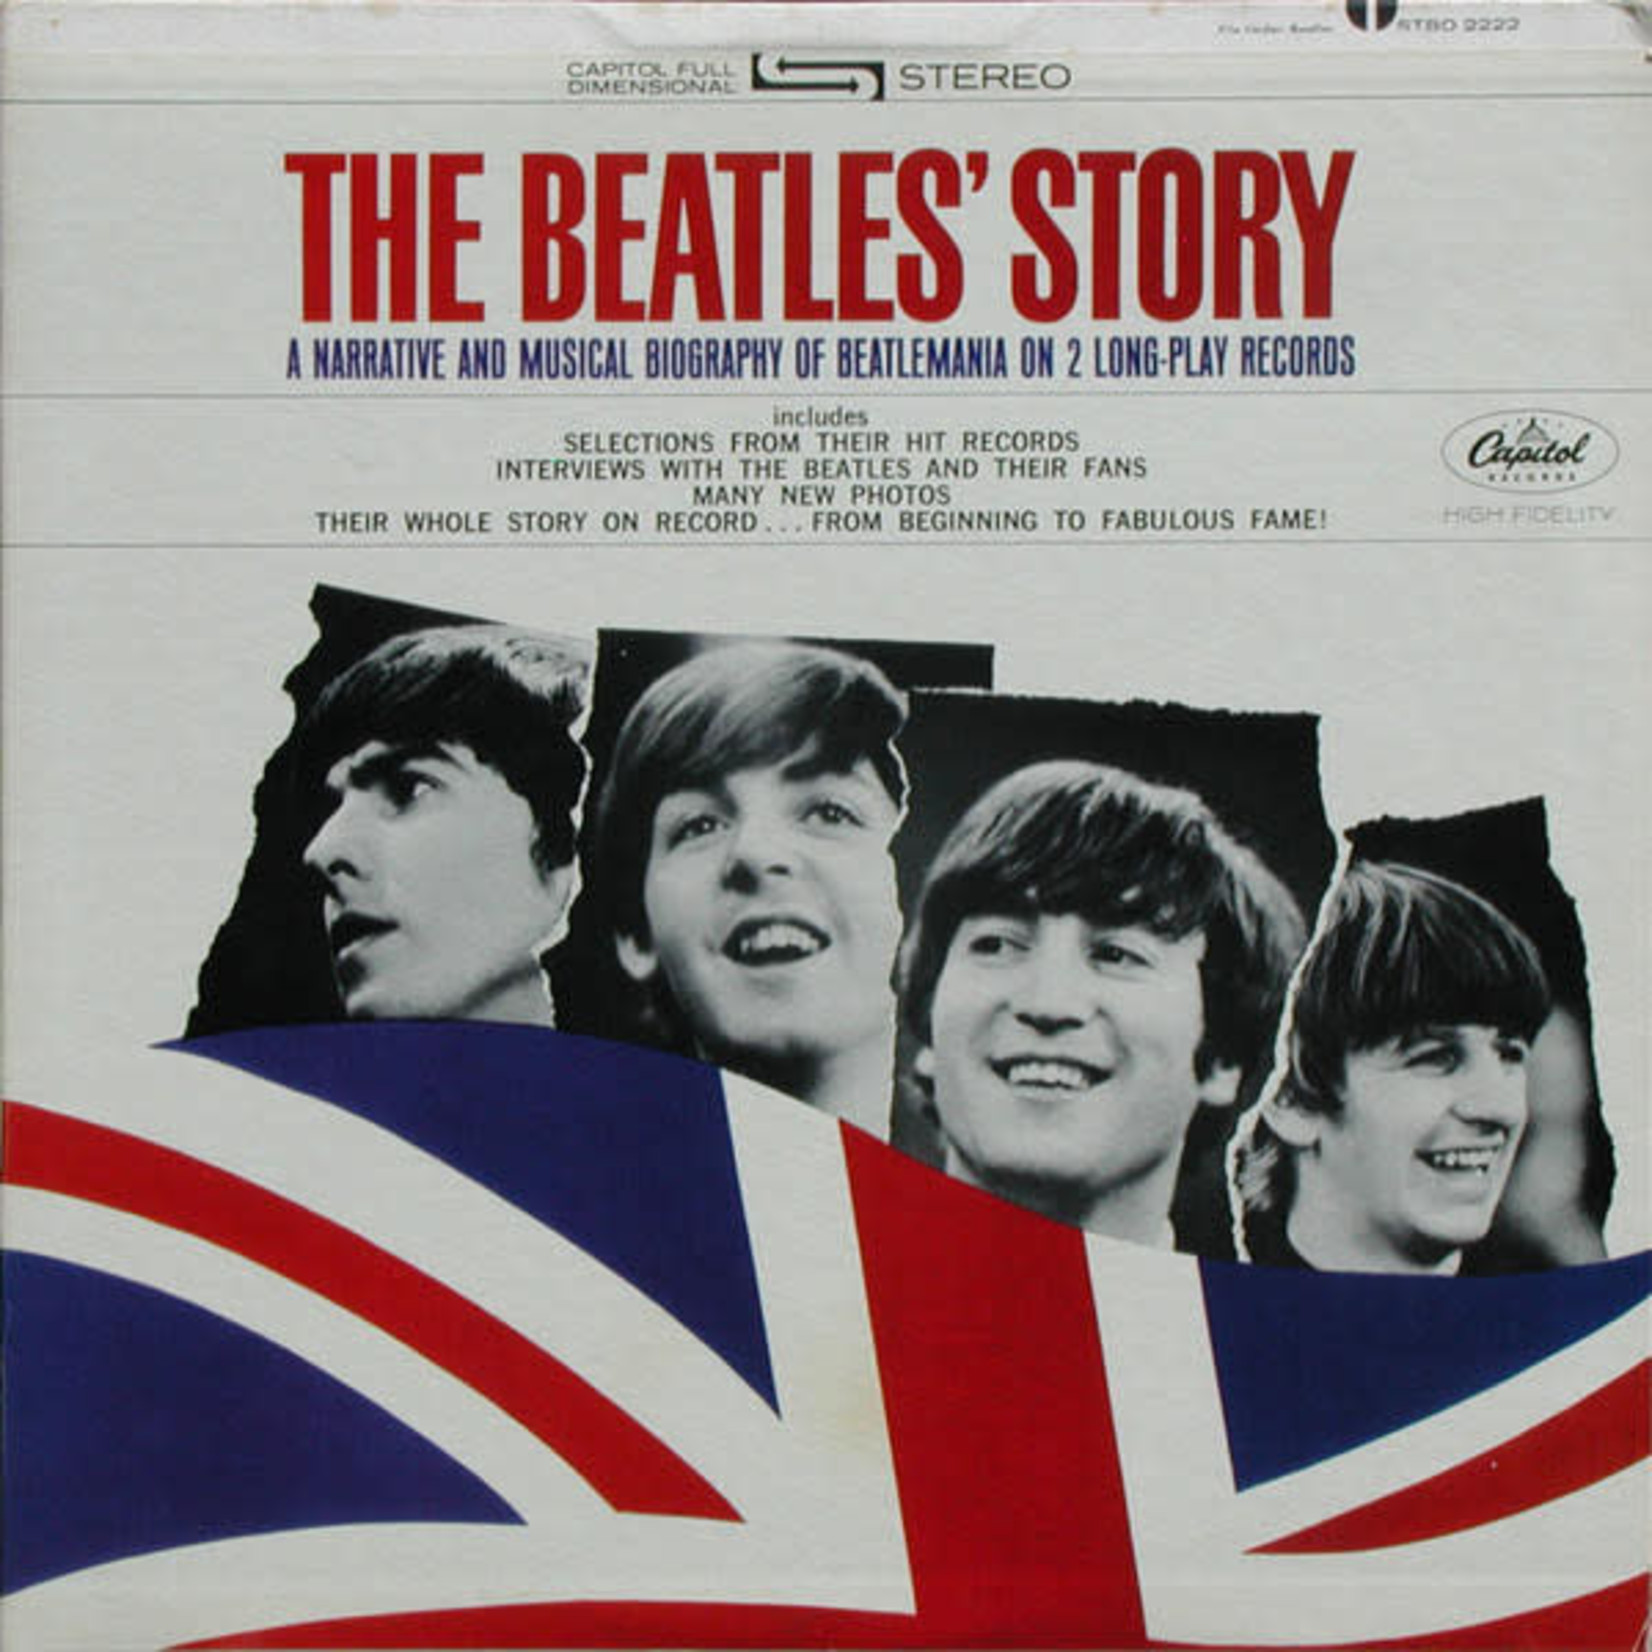 [Vintage] Various Artists - The Beatles Story (soundtrack, reissue)